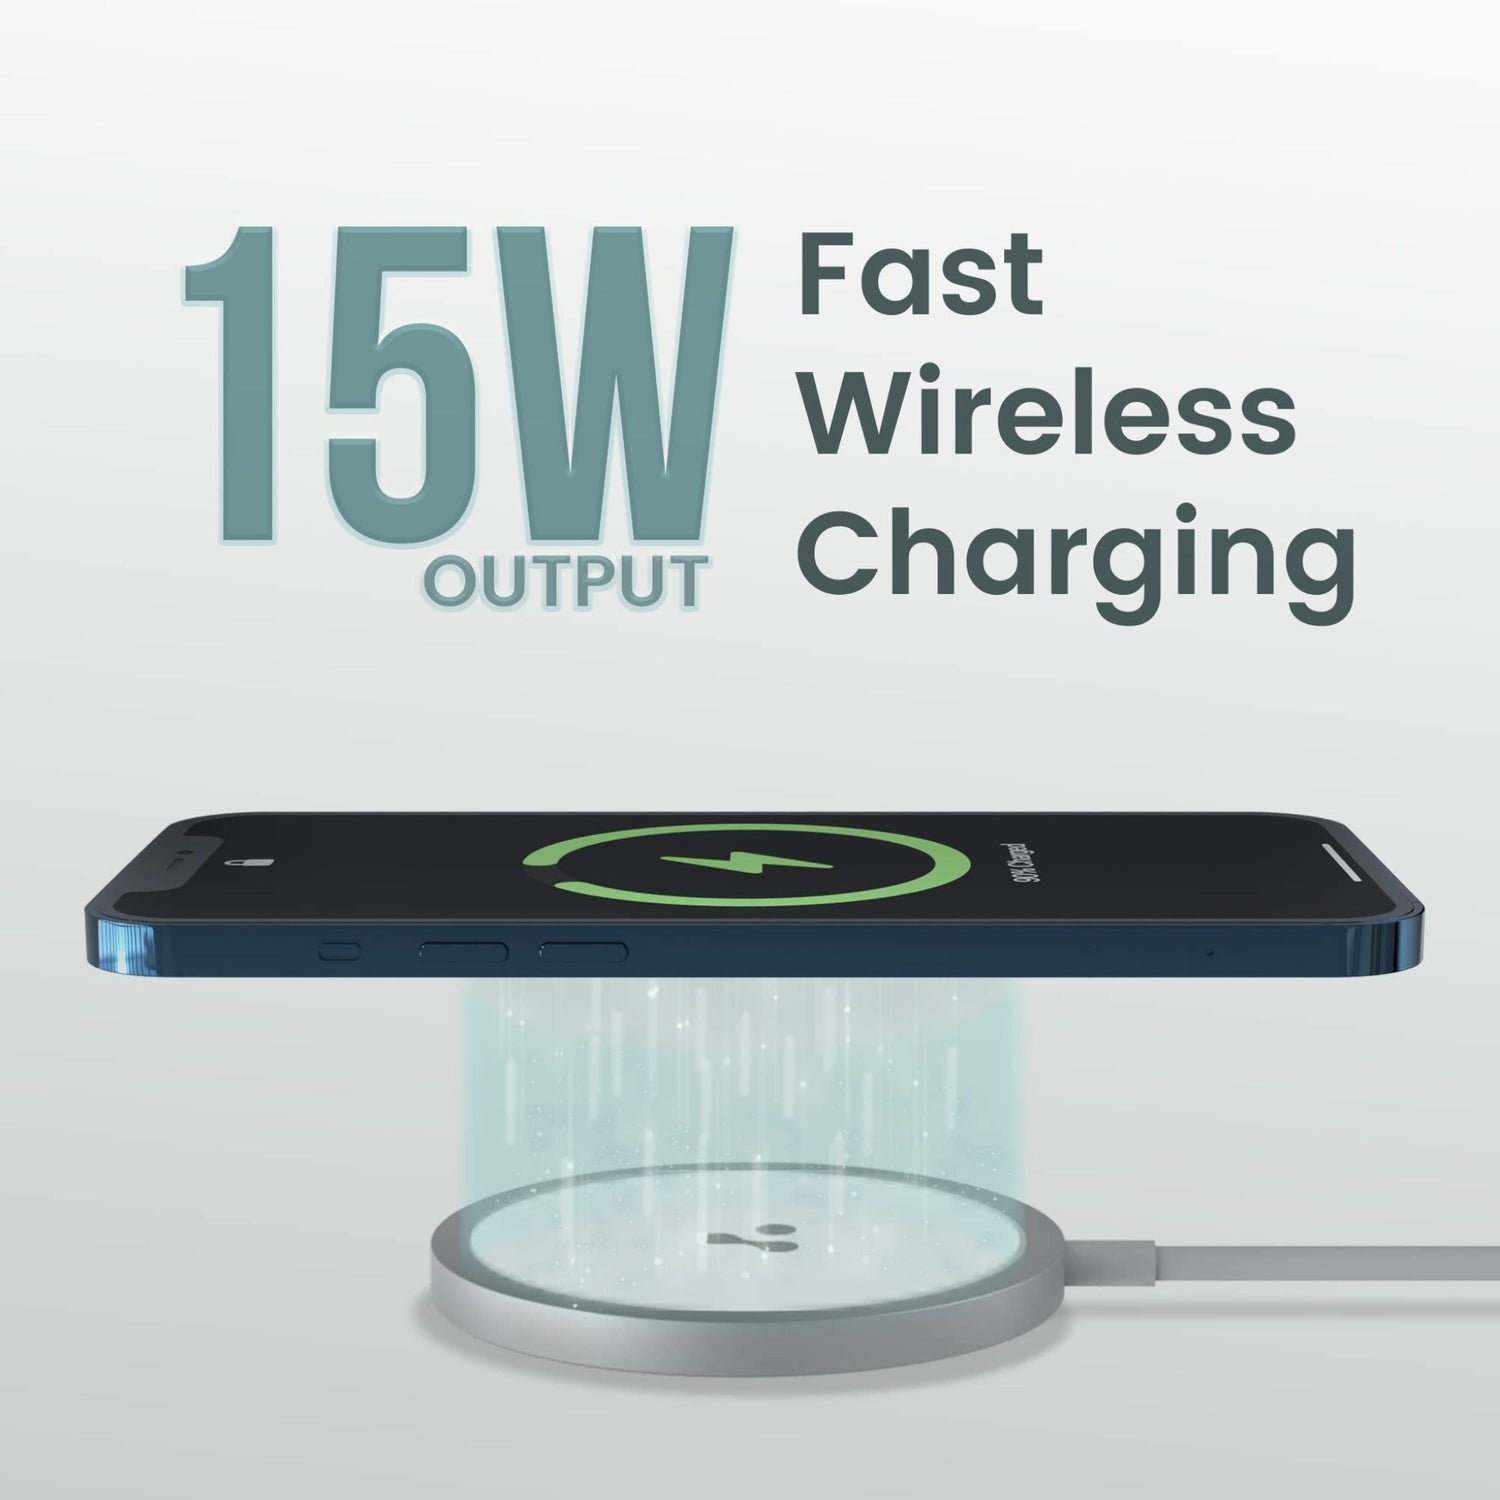 Ambrane Wireless Charger 15W fast charging - Magnetic - Aerosync